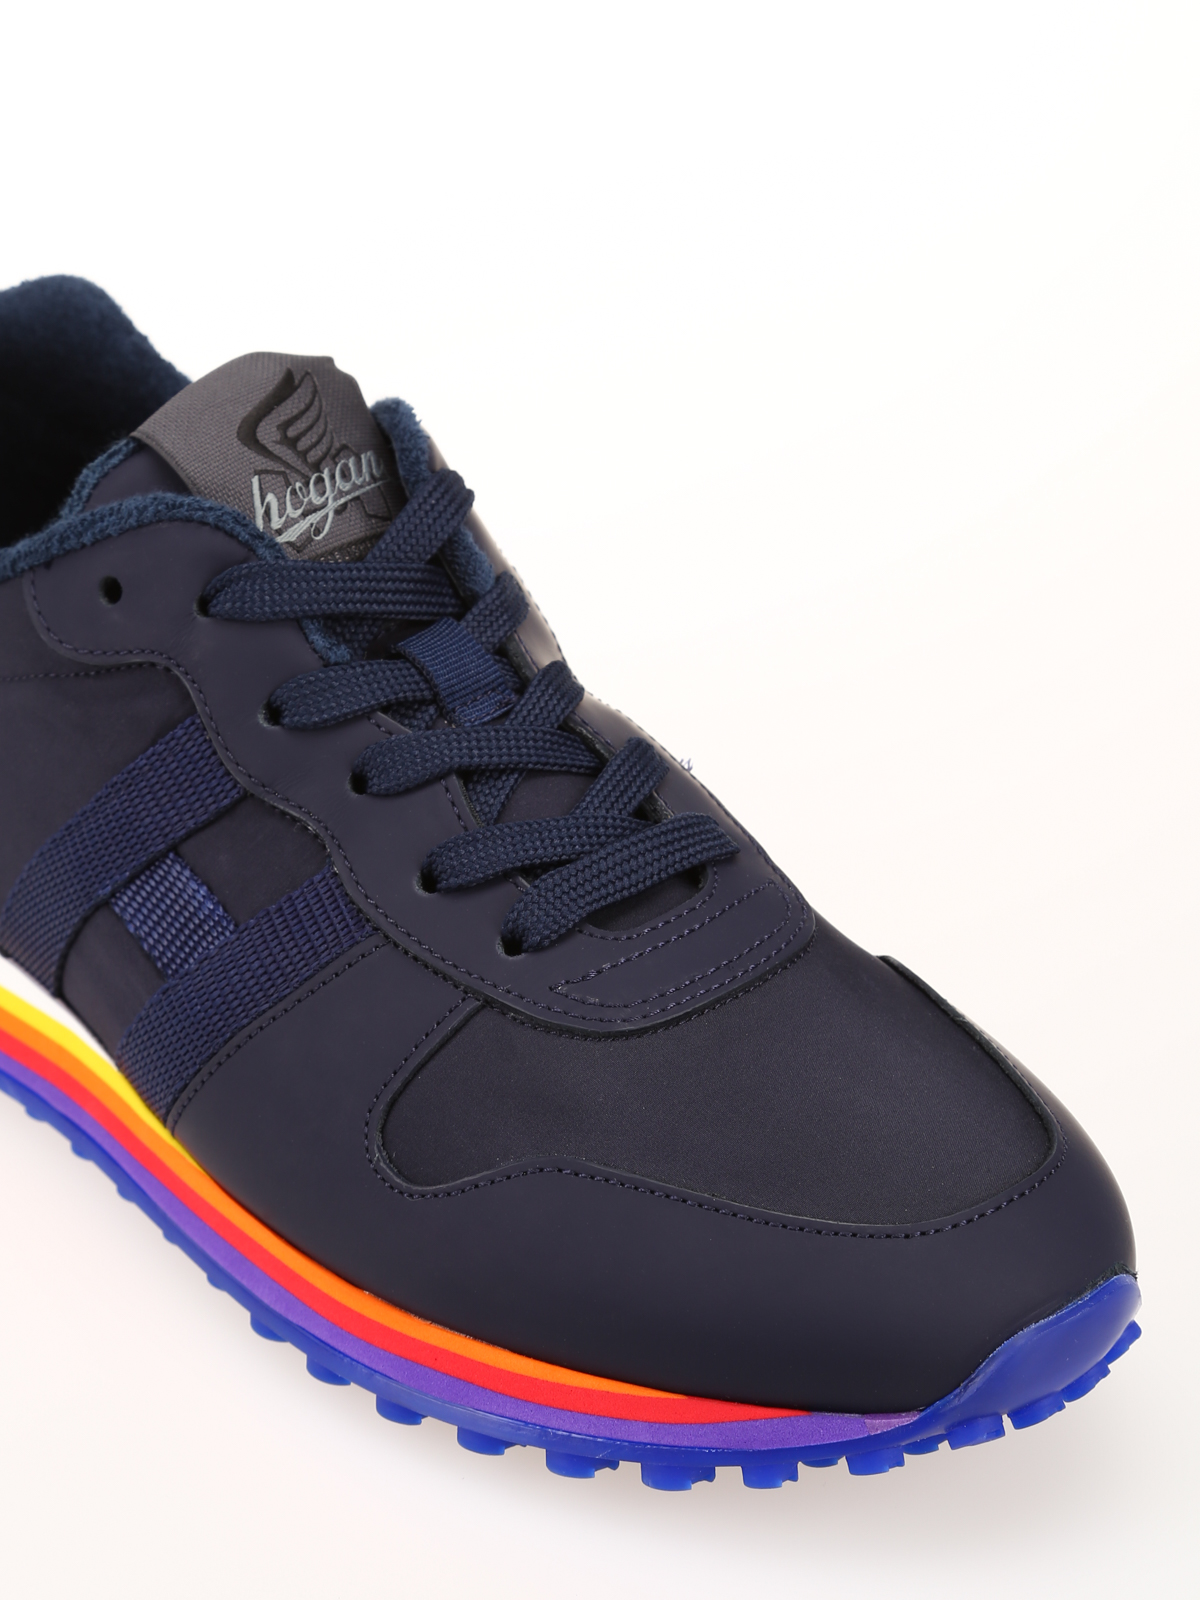 Hogan - Rainbow sole lace-up sneakers 